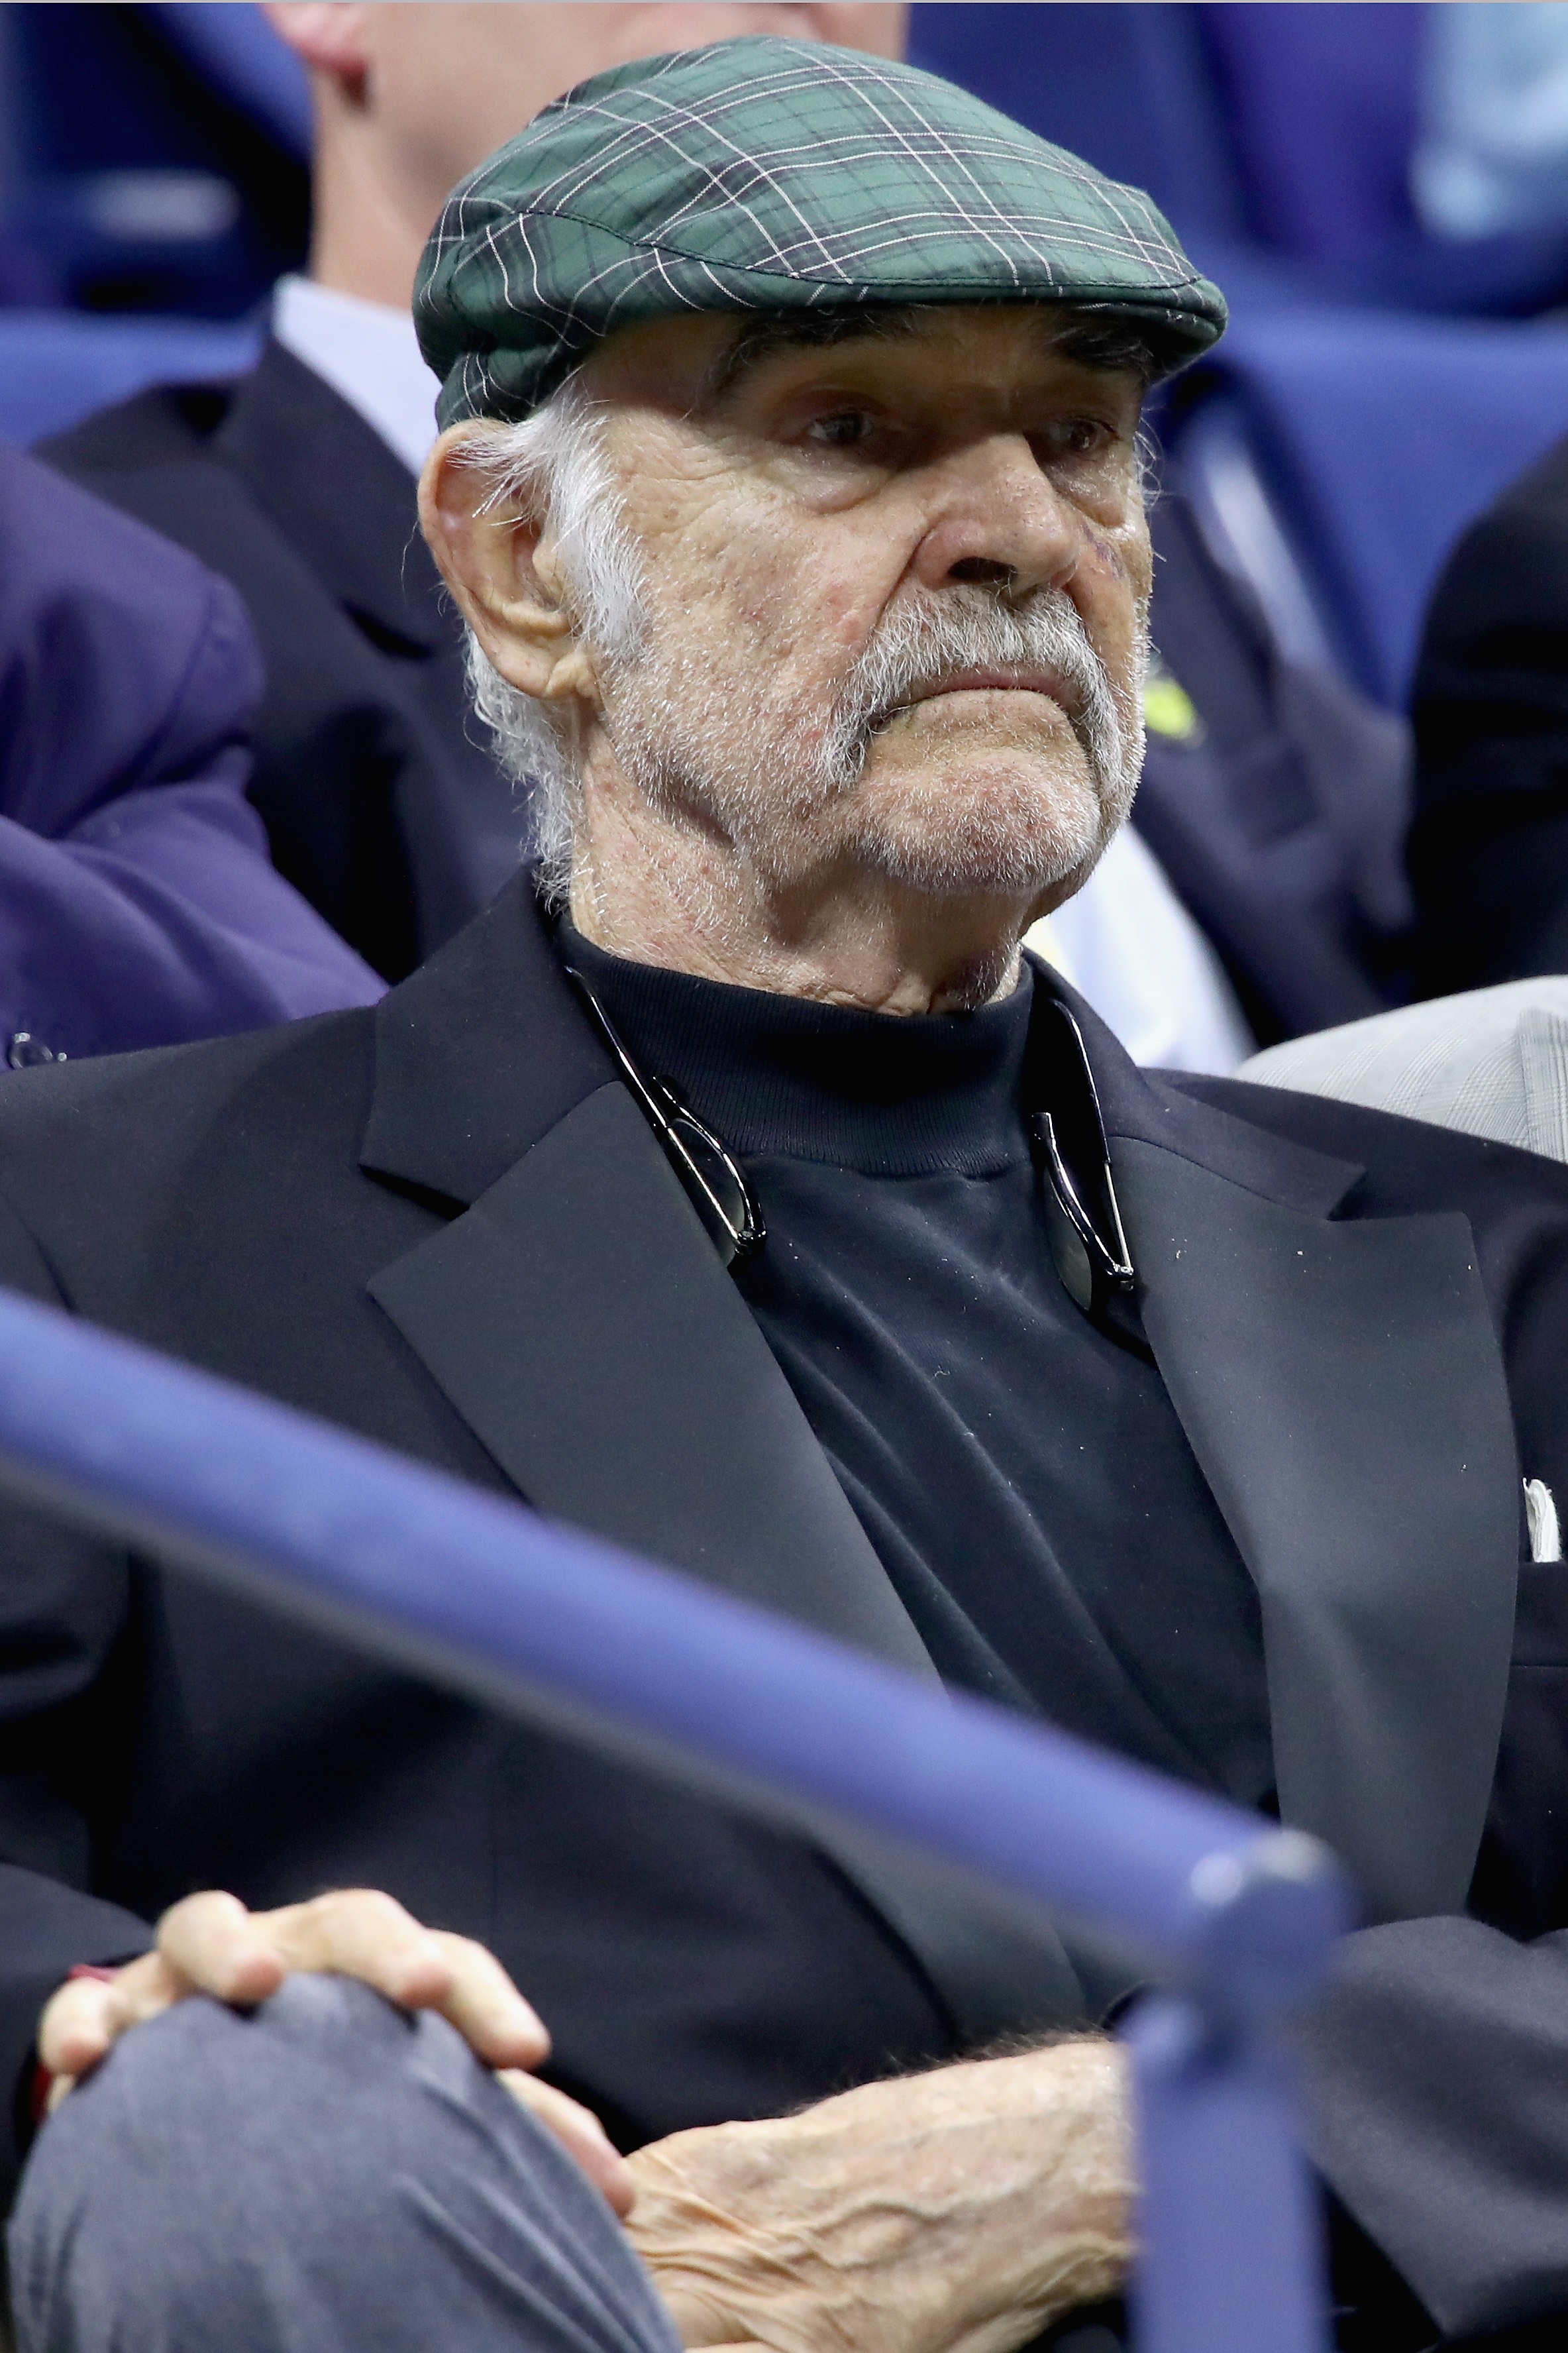 Sean Connery at the US Open 2017 at USTA Billie Jean King National Tennis Center on August 29, 2017 in New York City. | Source: Getty Images